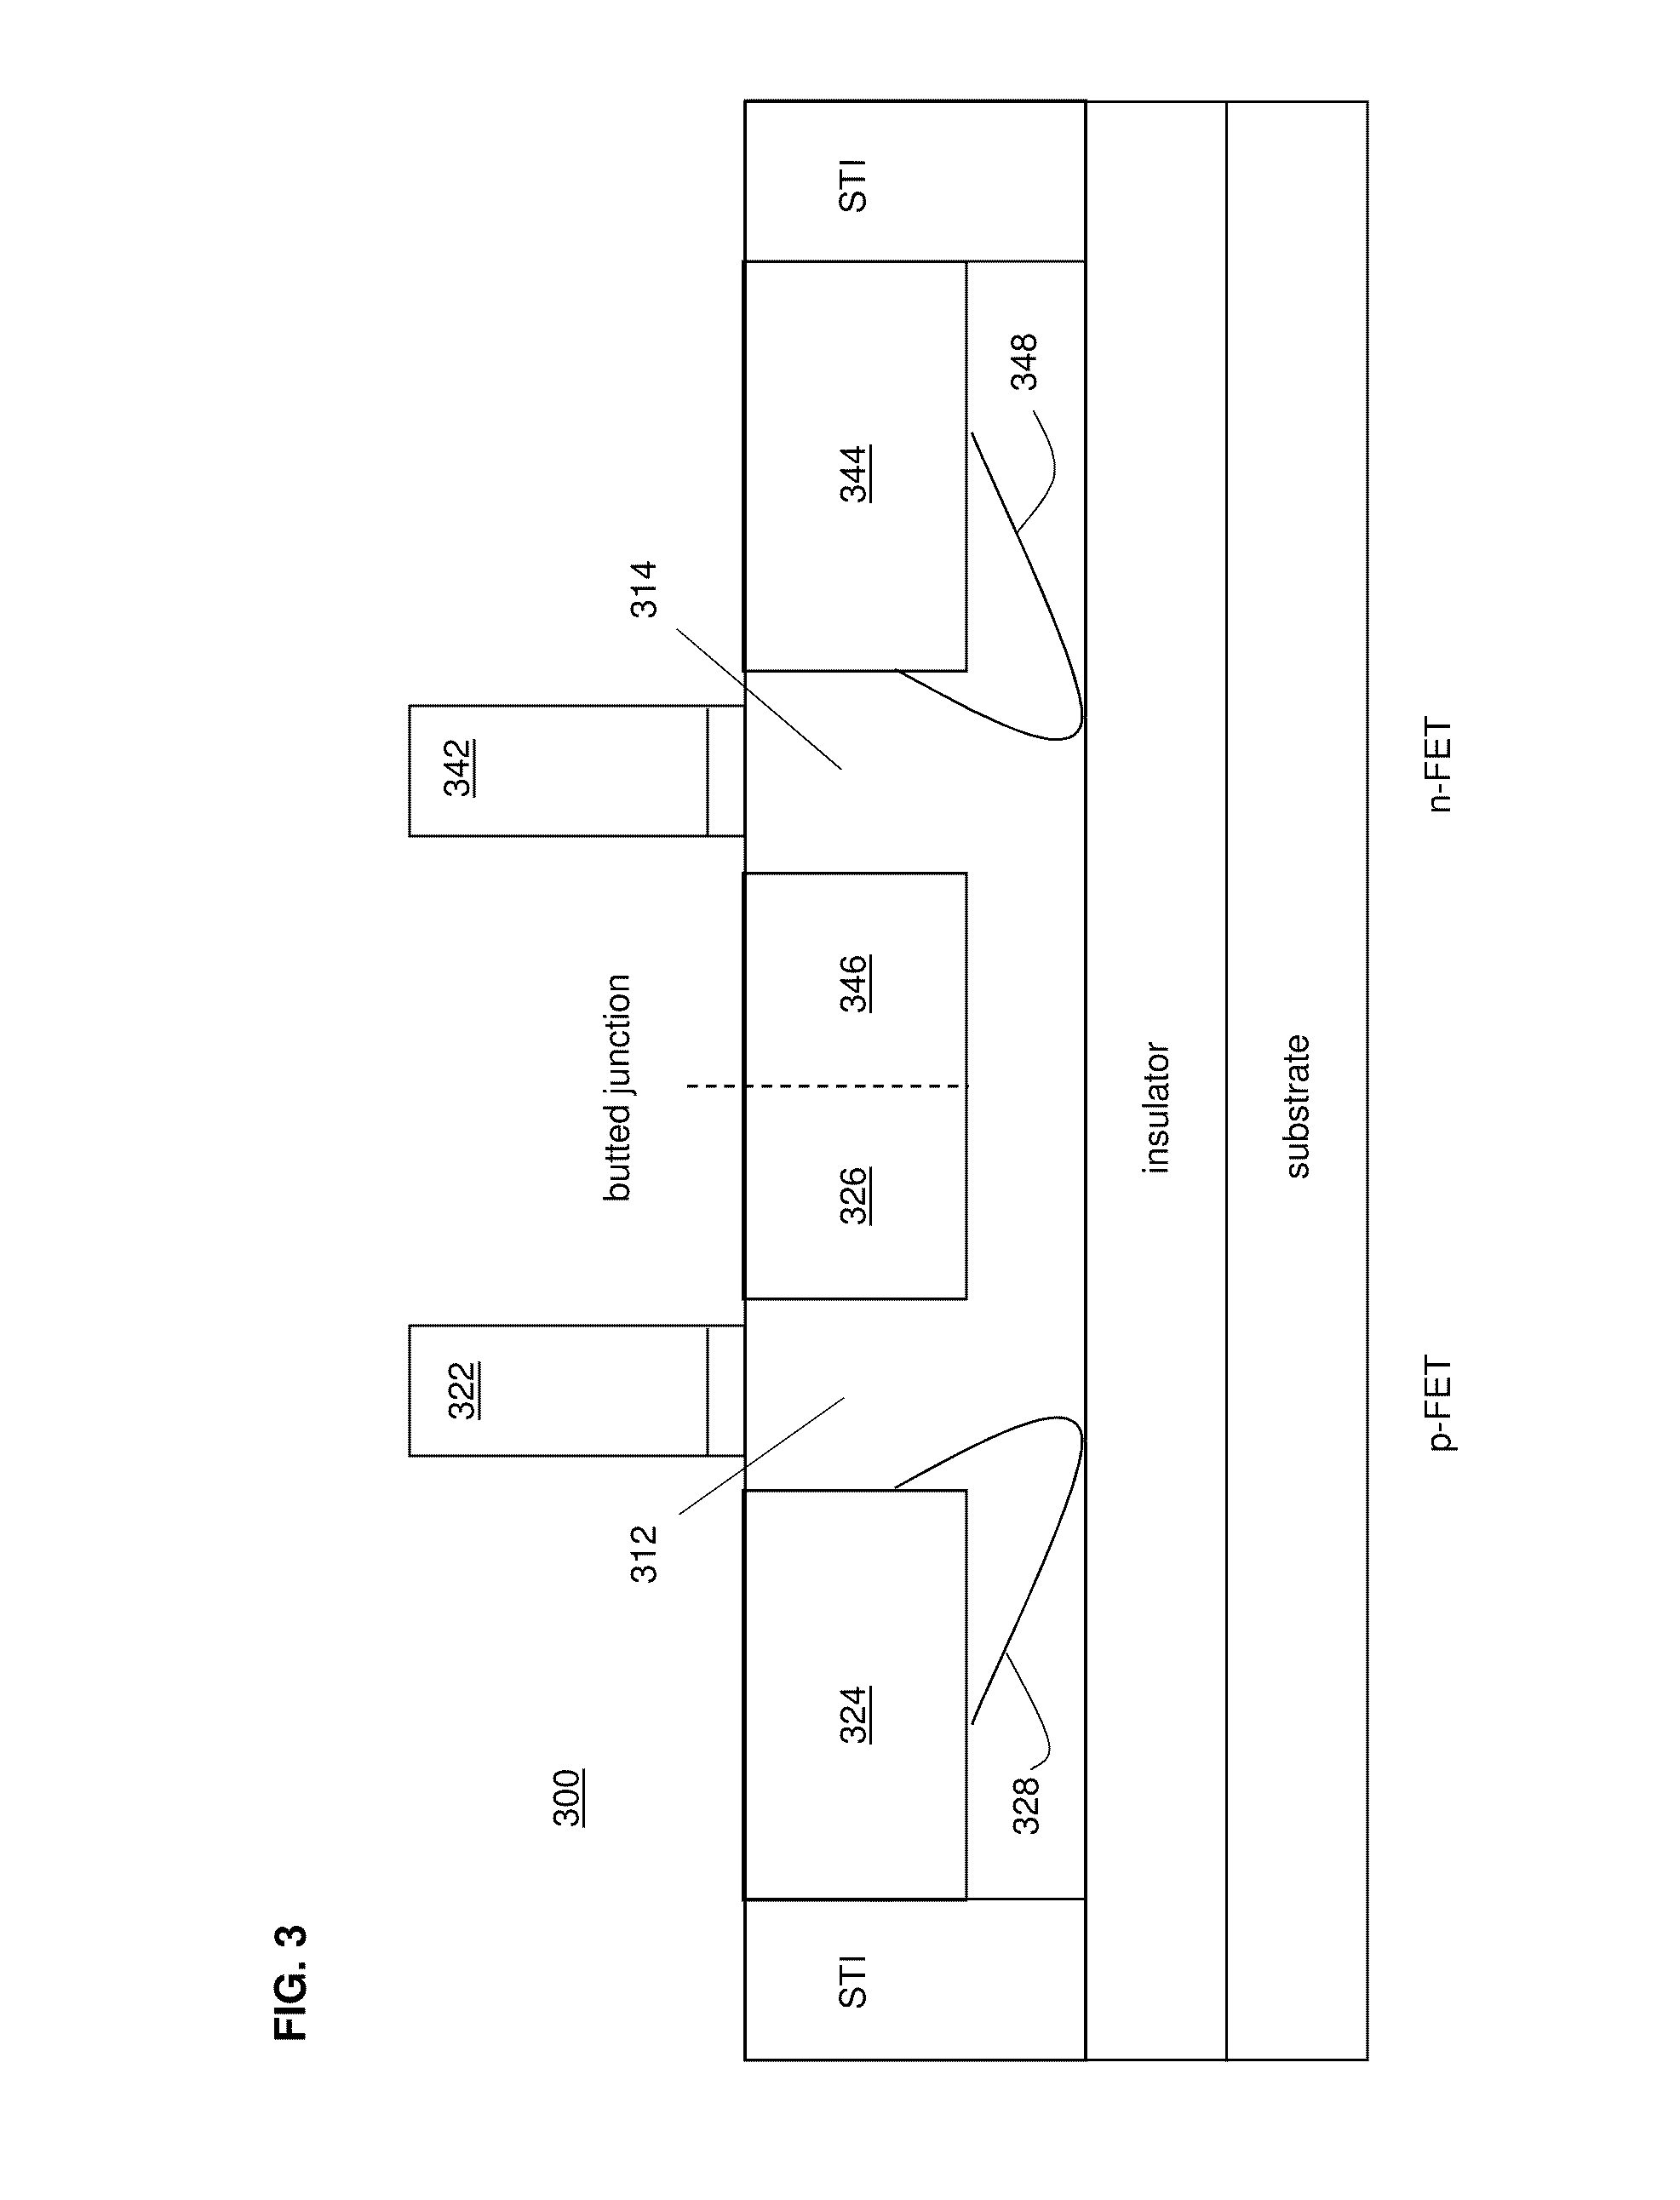 High density butted junction CMOS inverter,  and making and layout of same